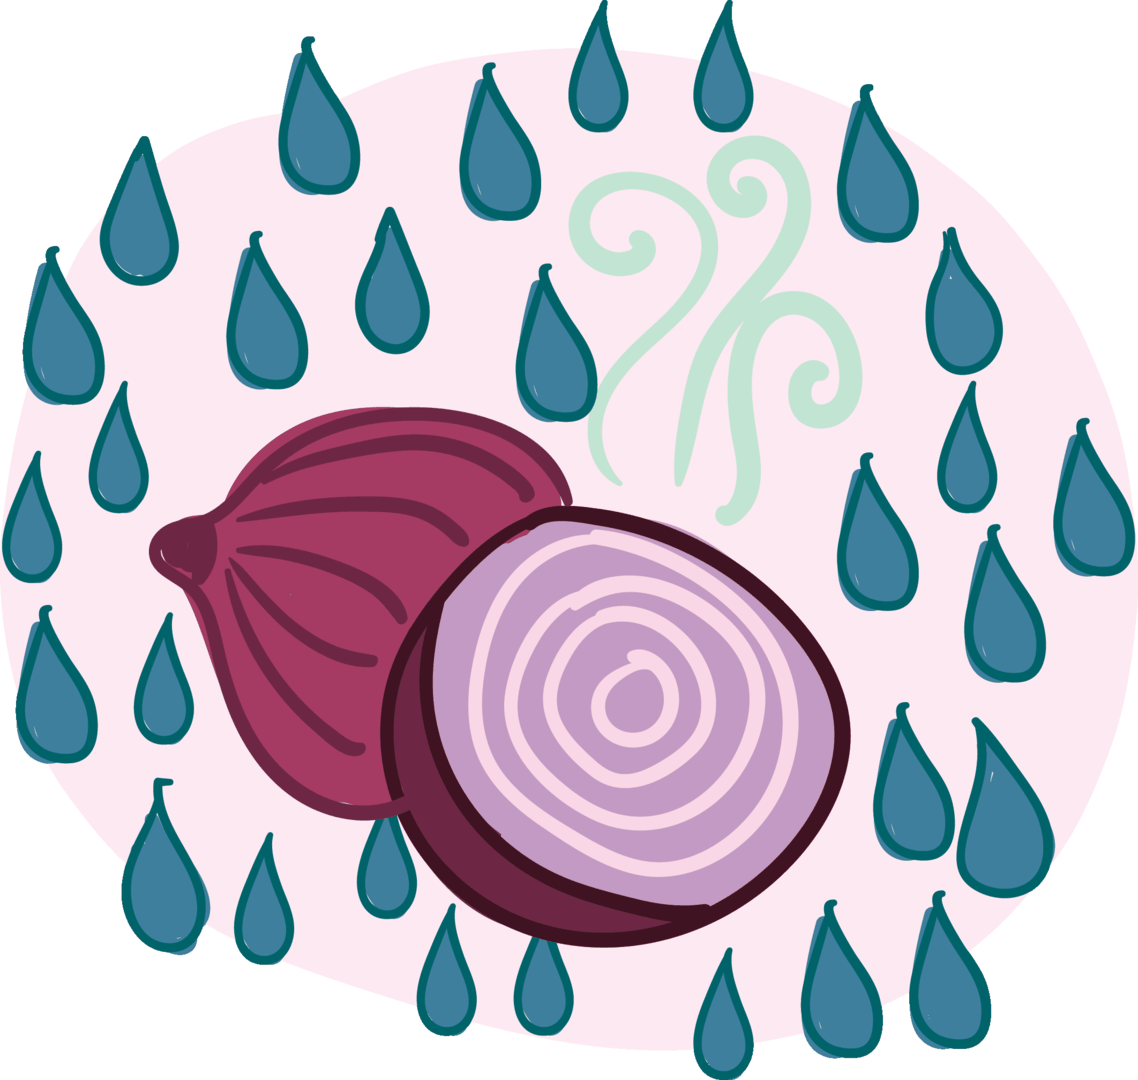 Awesome, obnoxious onions